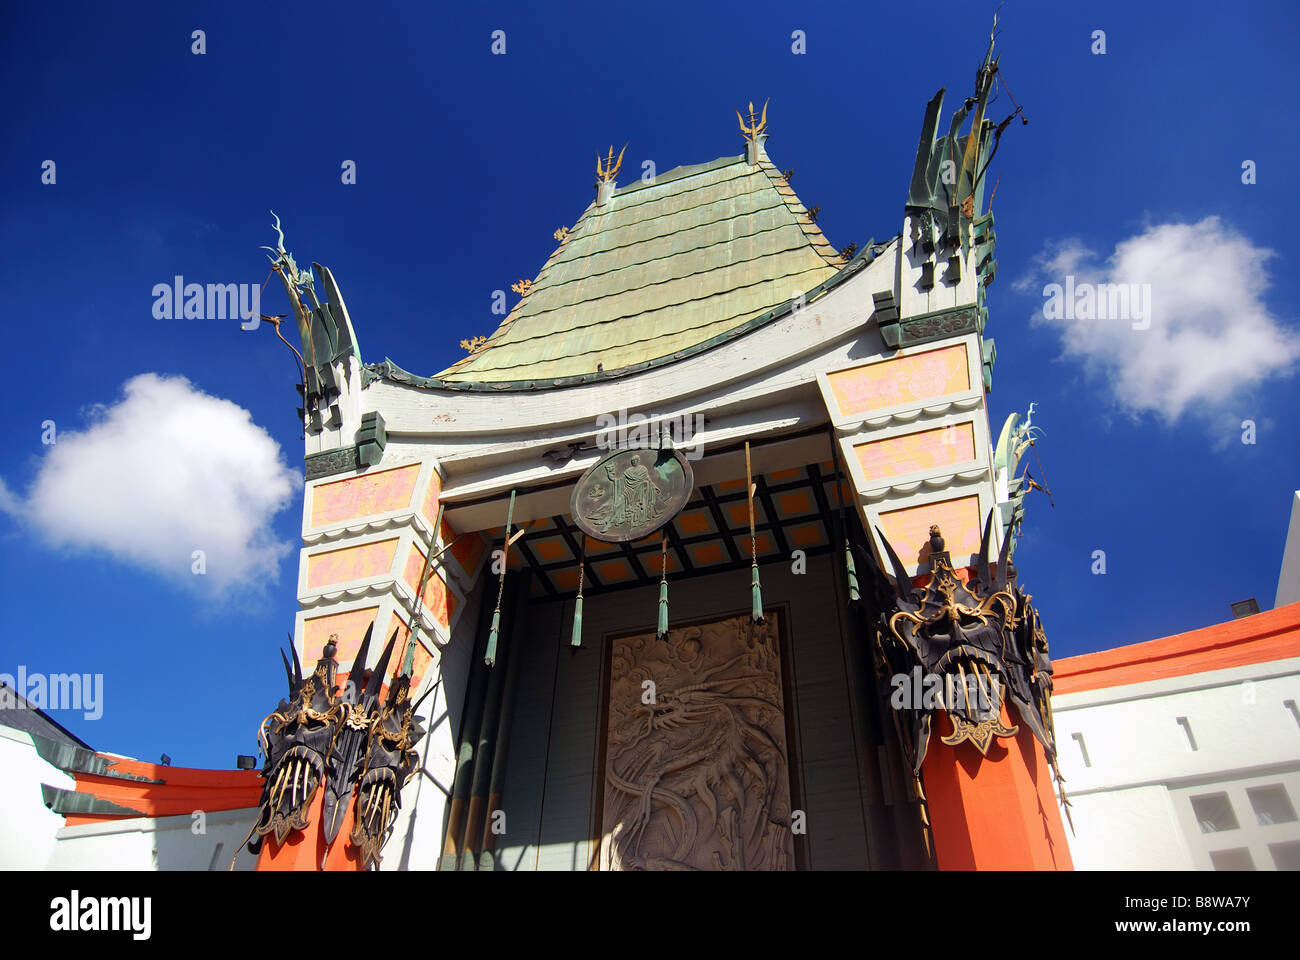 Entrance to TCL Grauman's Chinese Theatre, Hollywood Boulevard, Hollywood, Los Angeles, California, United States of America Stock Photo